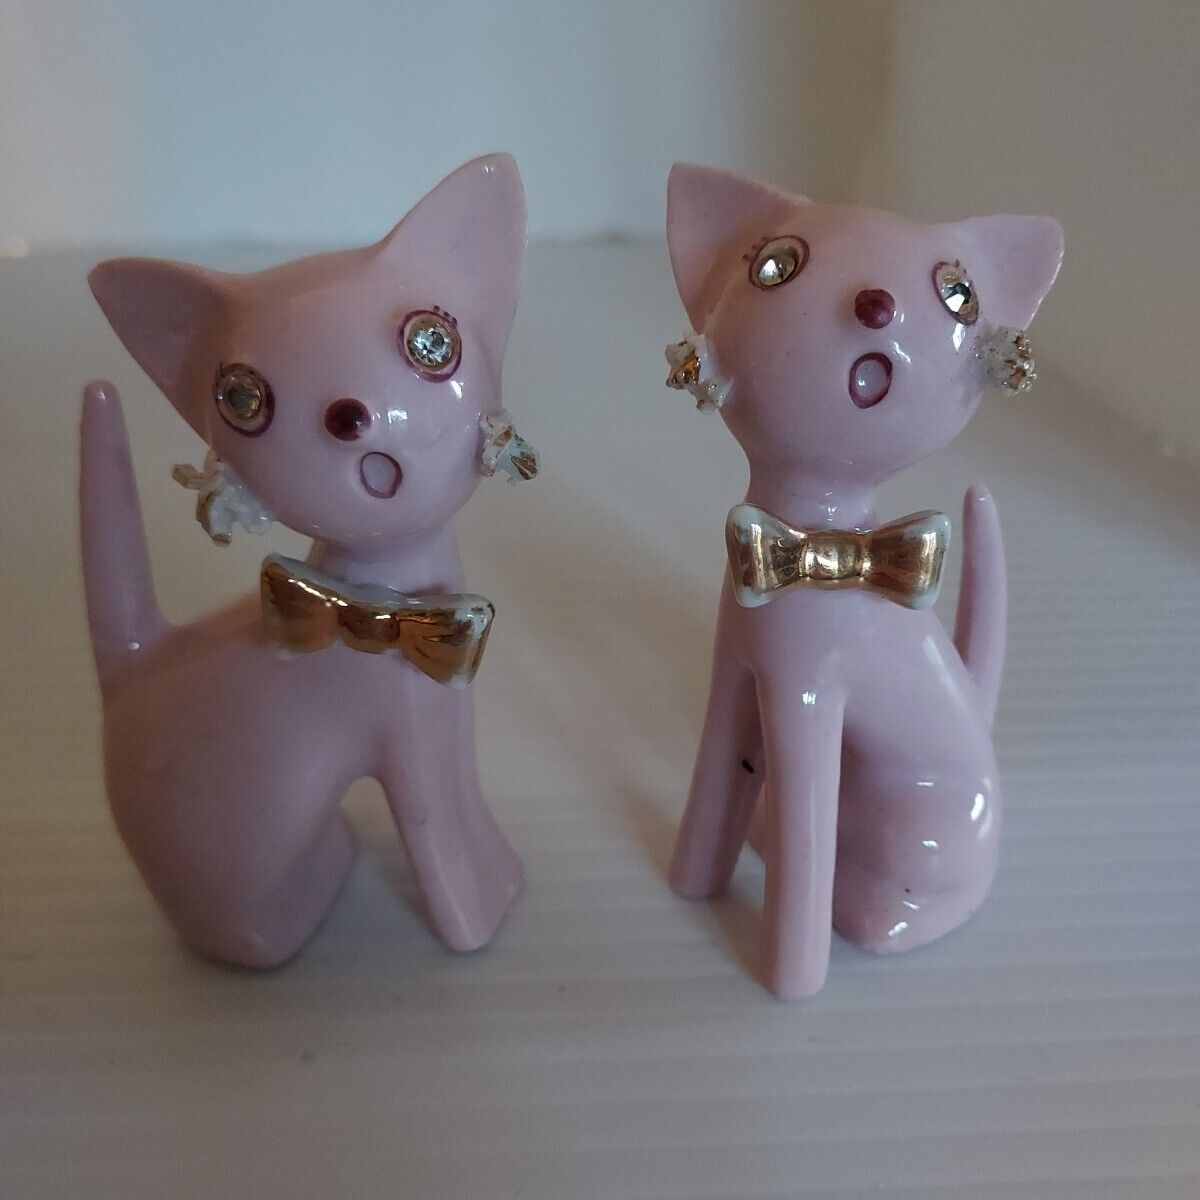 Vintage Kitschy Cats Wailing Meowing Spaghetti Gilded